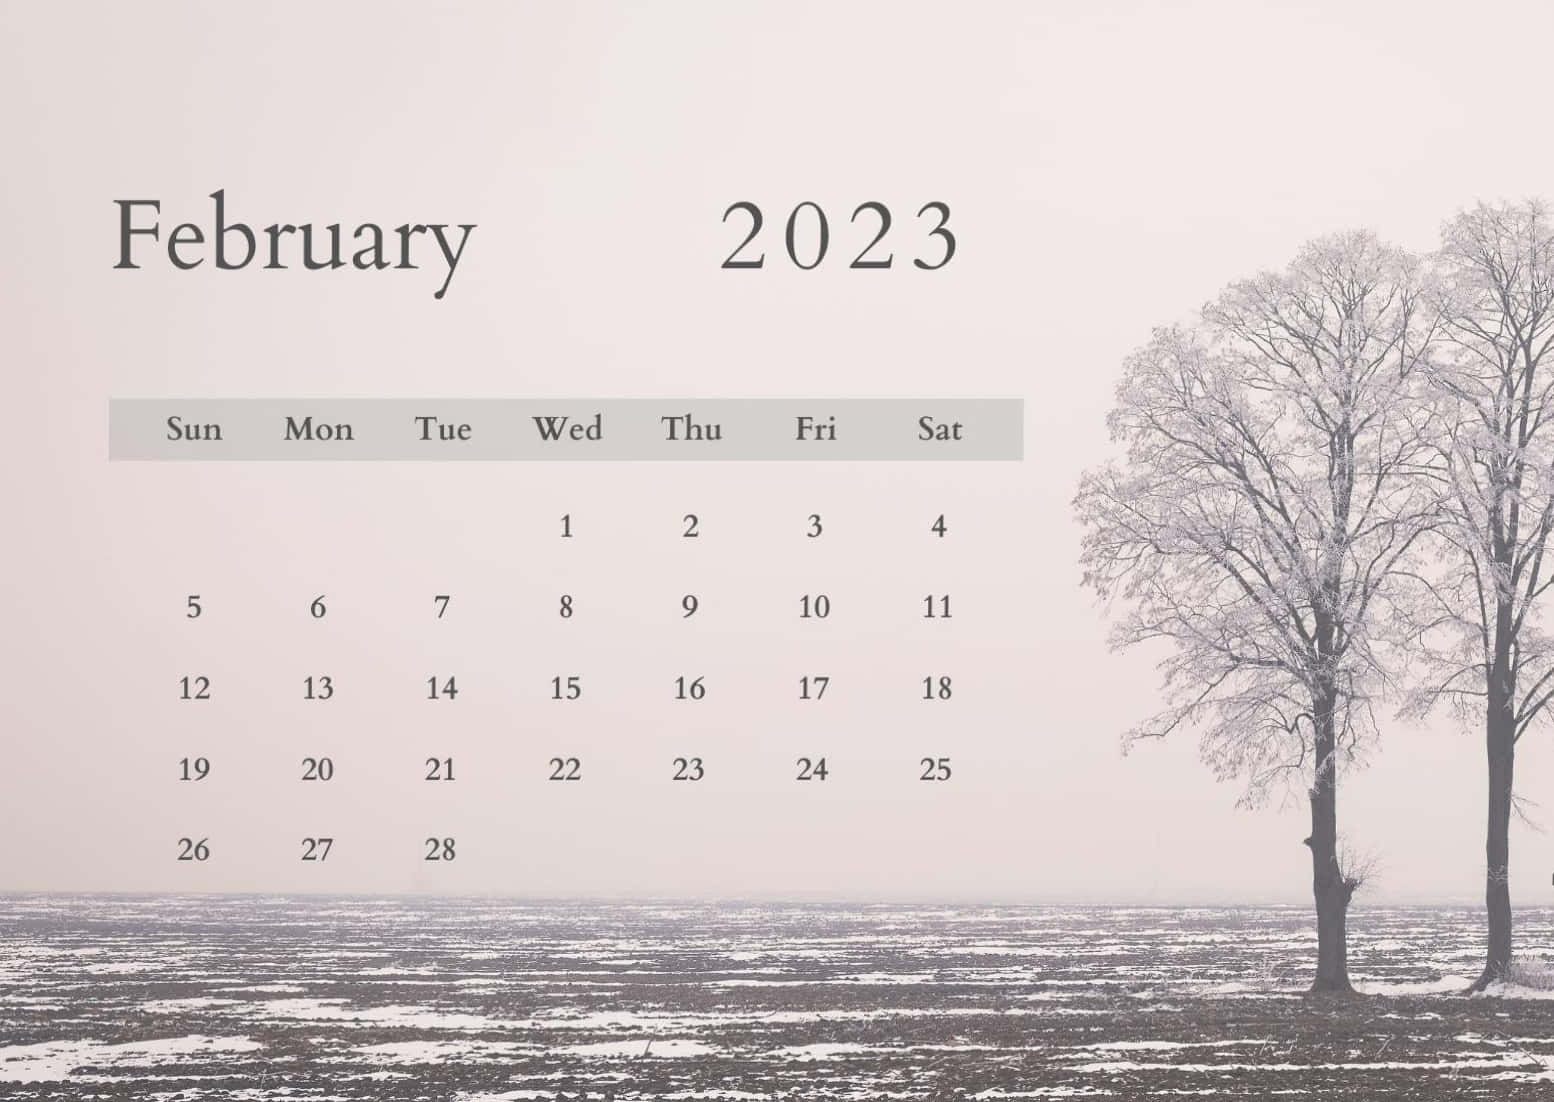 February 2023 Calendar With Trees In The Snow Wallpaper